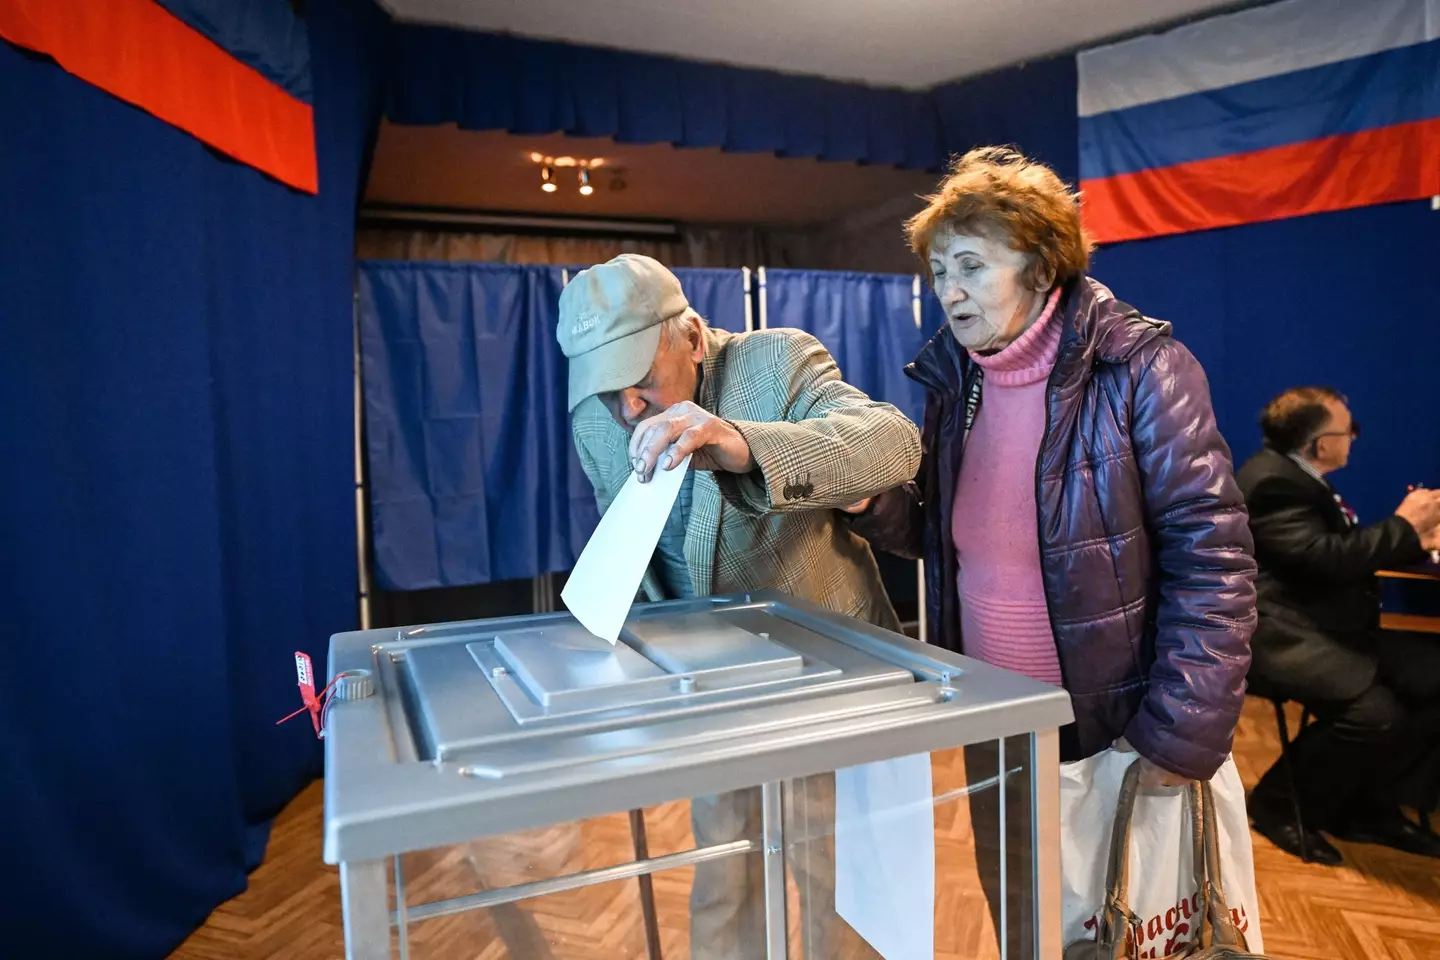 People voting on the entry of the Donetsk People's Republic, Luhansk People's Republic, Kherson and Zaporozhye regions into Russia.